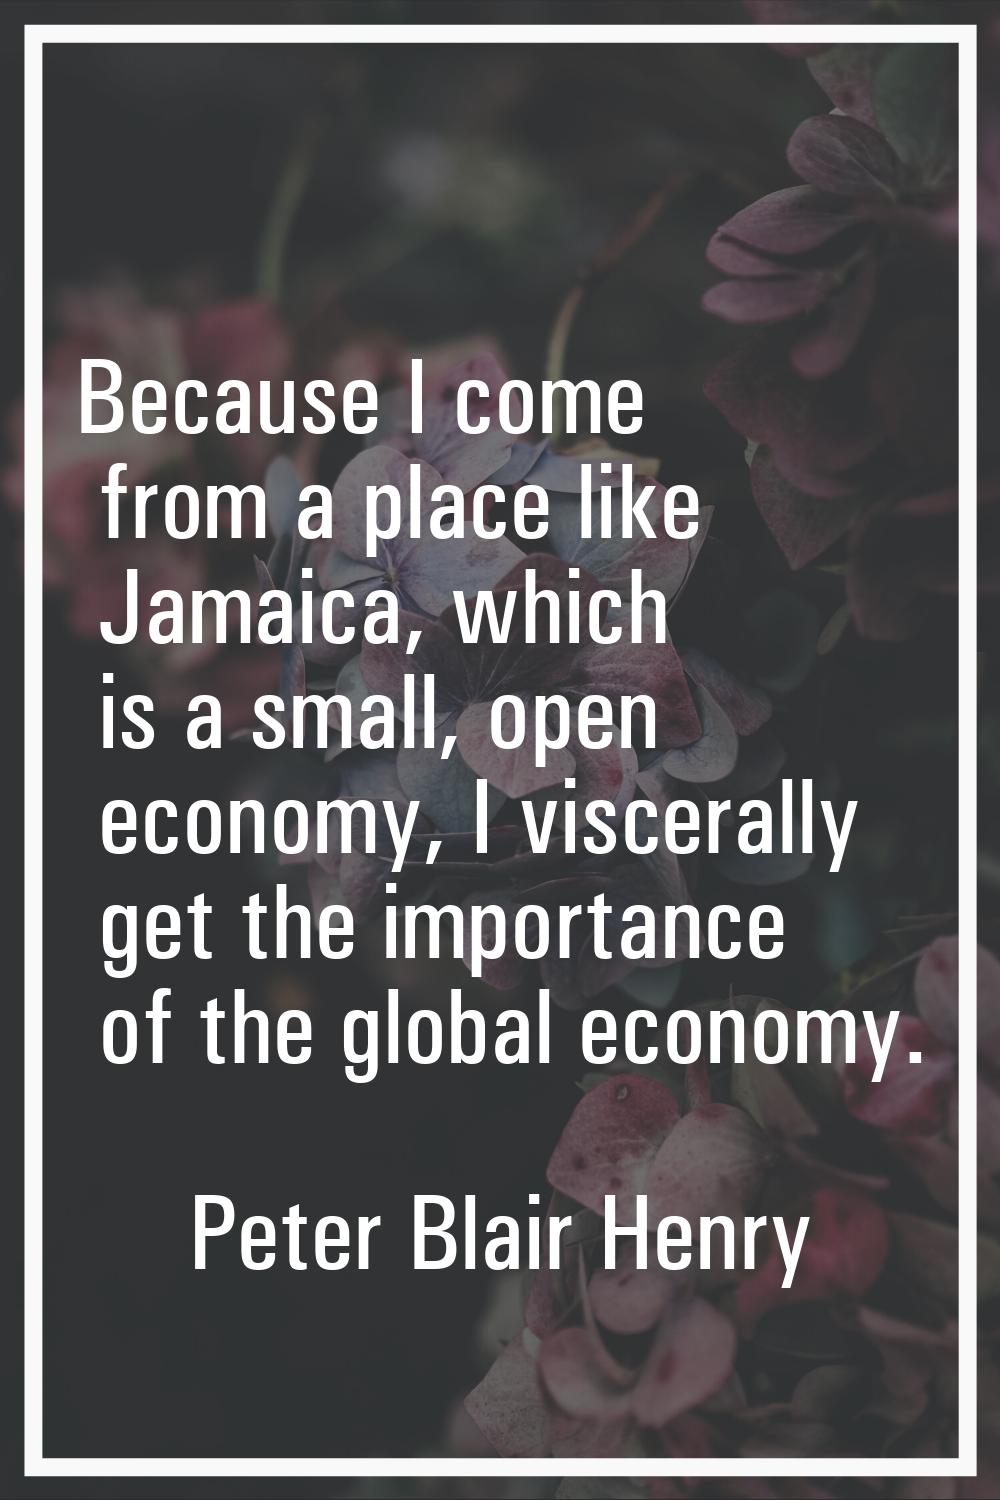 Because I come from a place like Jamaica, which is a small, open economy, I viscerally get the impo